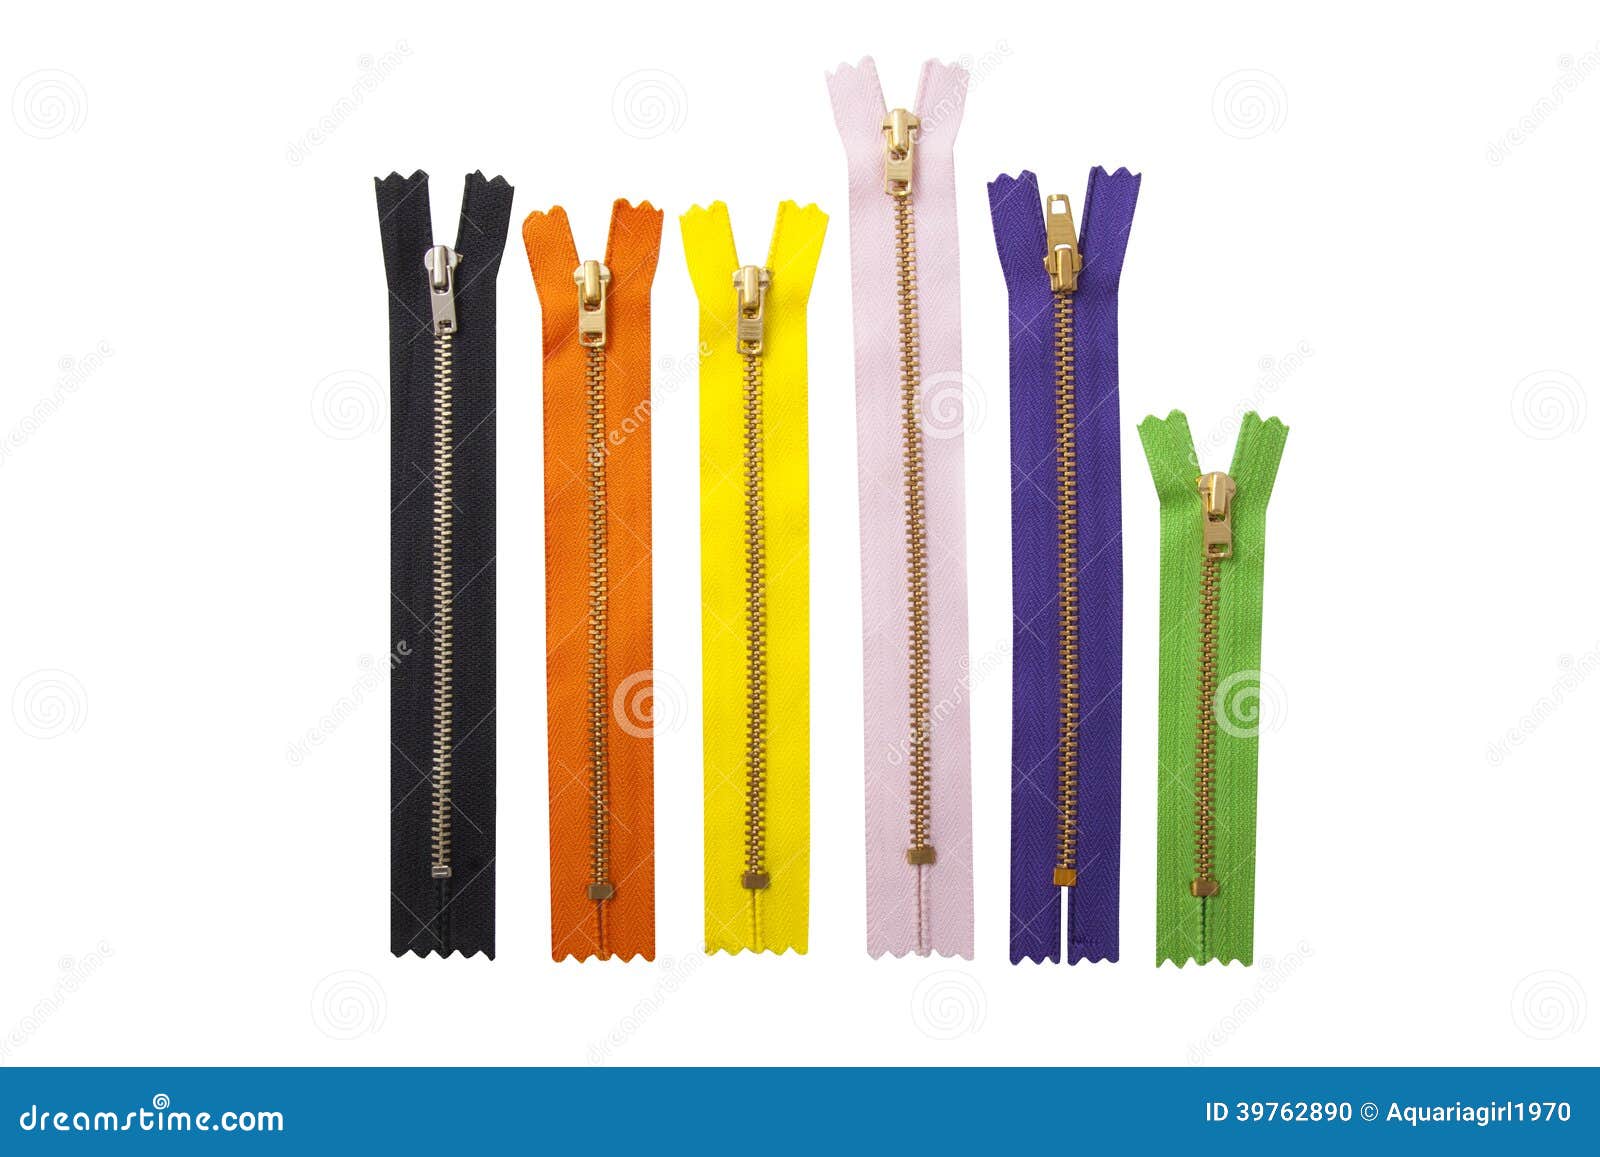 Zipper collection stock photo. Image of isolated, accessibility - 39762890